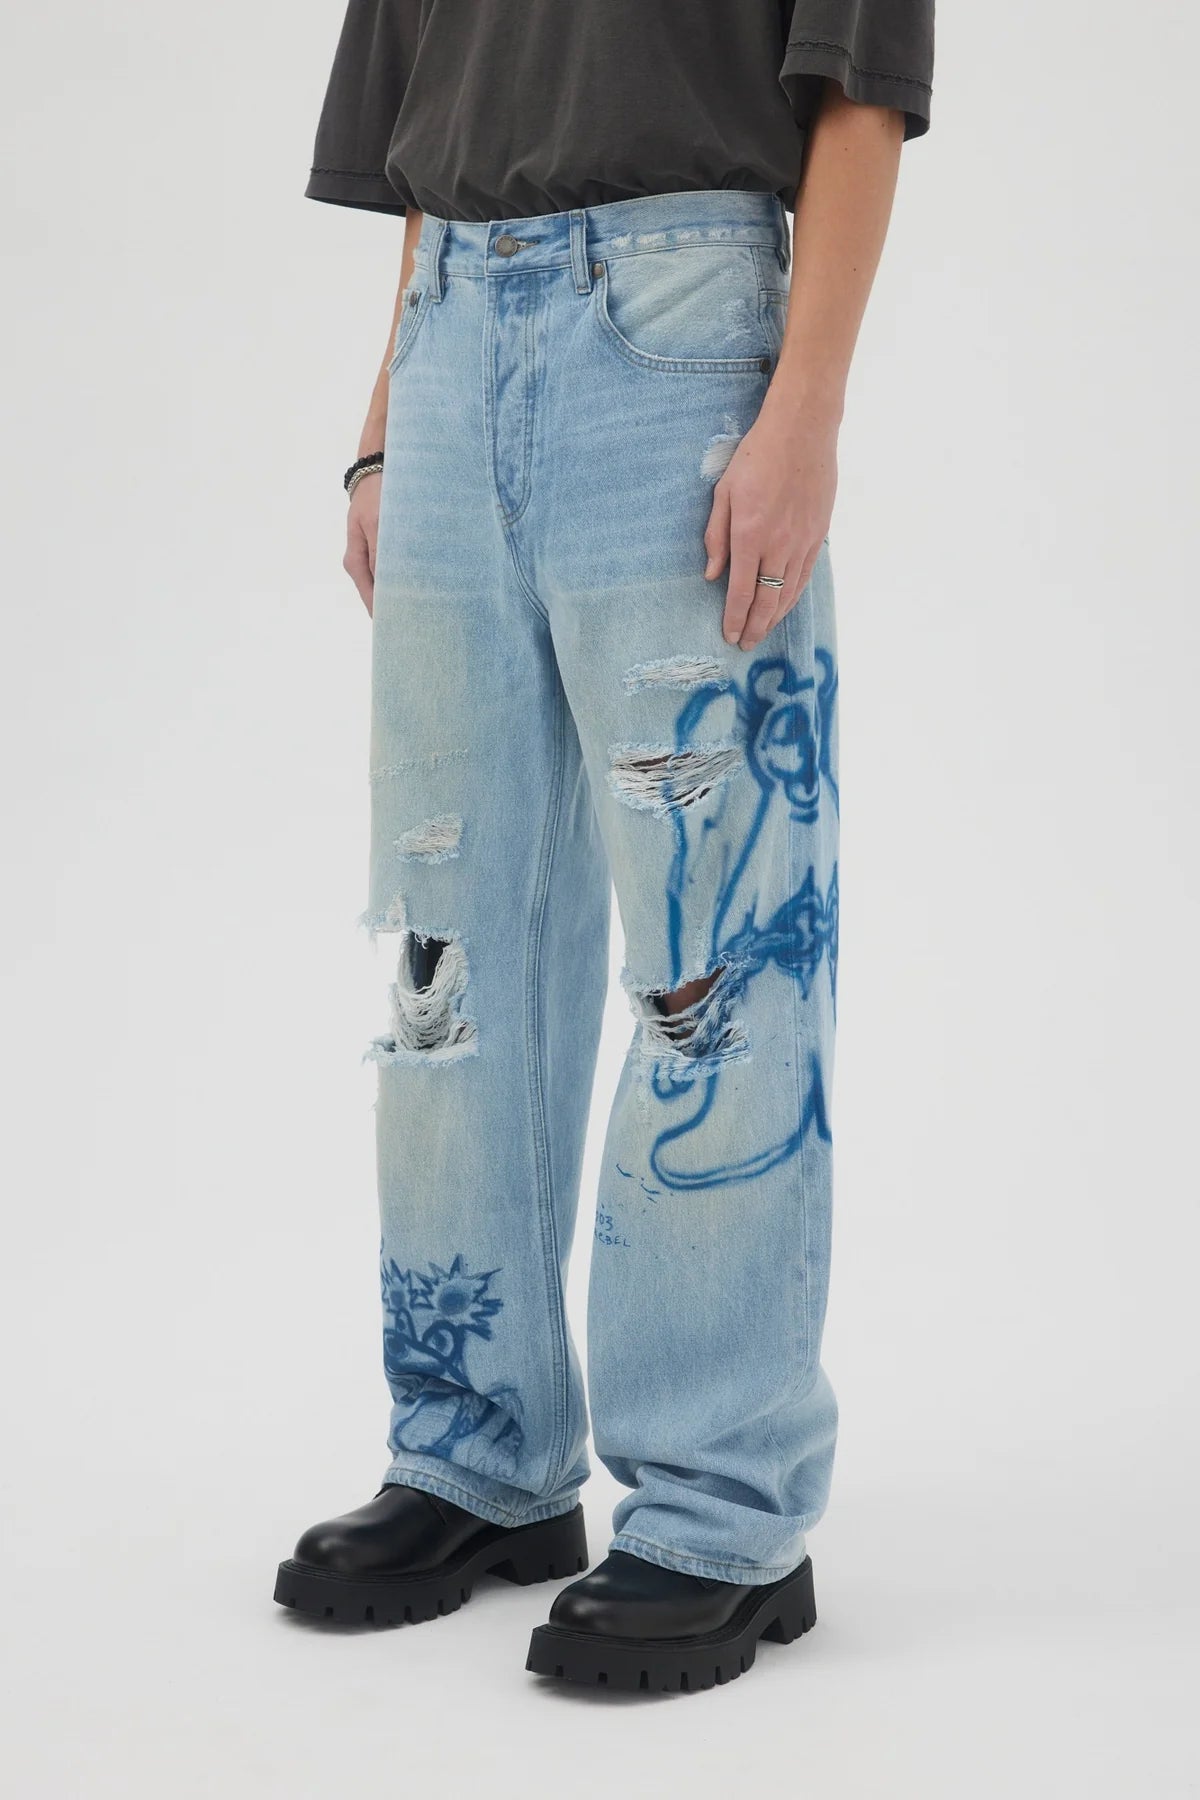 DOMREBEL ABOVE BOOTCUT JEANS